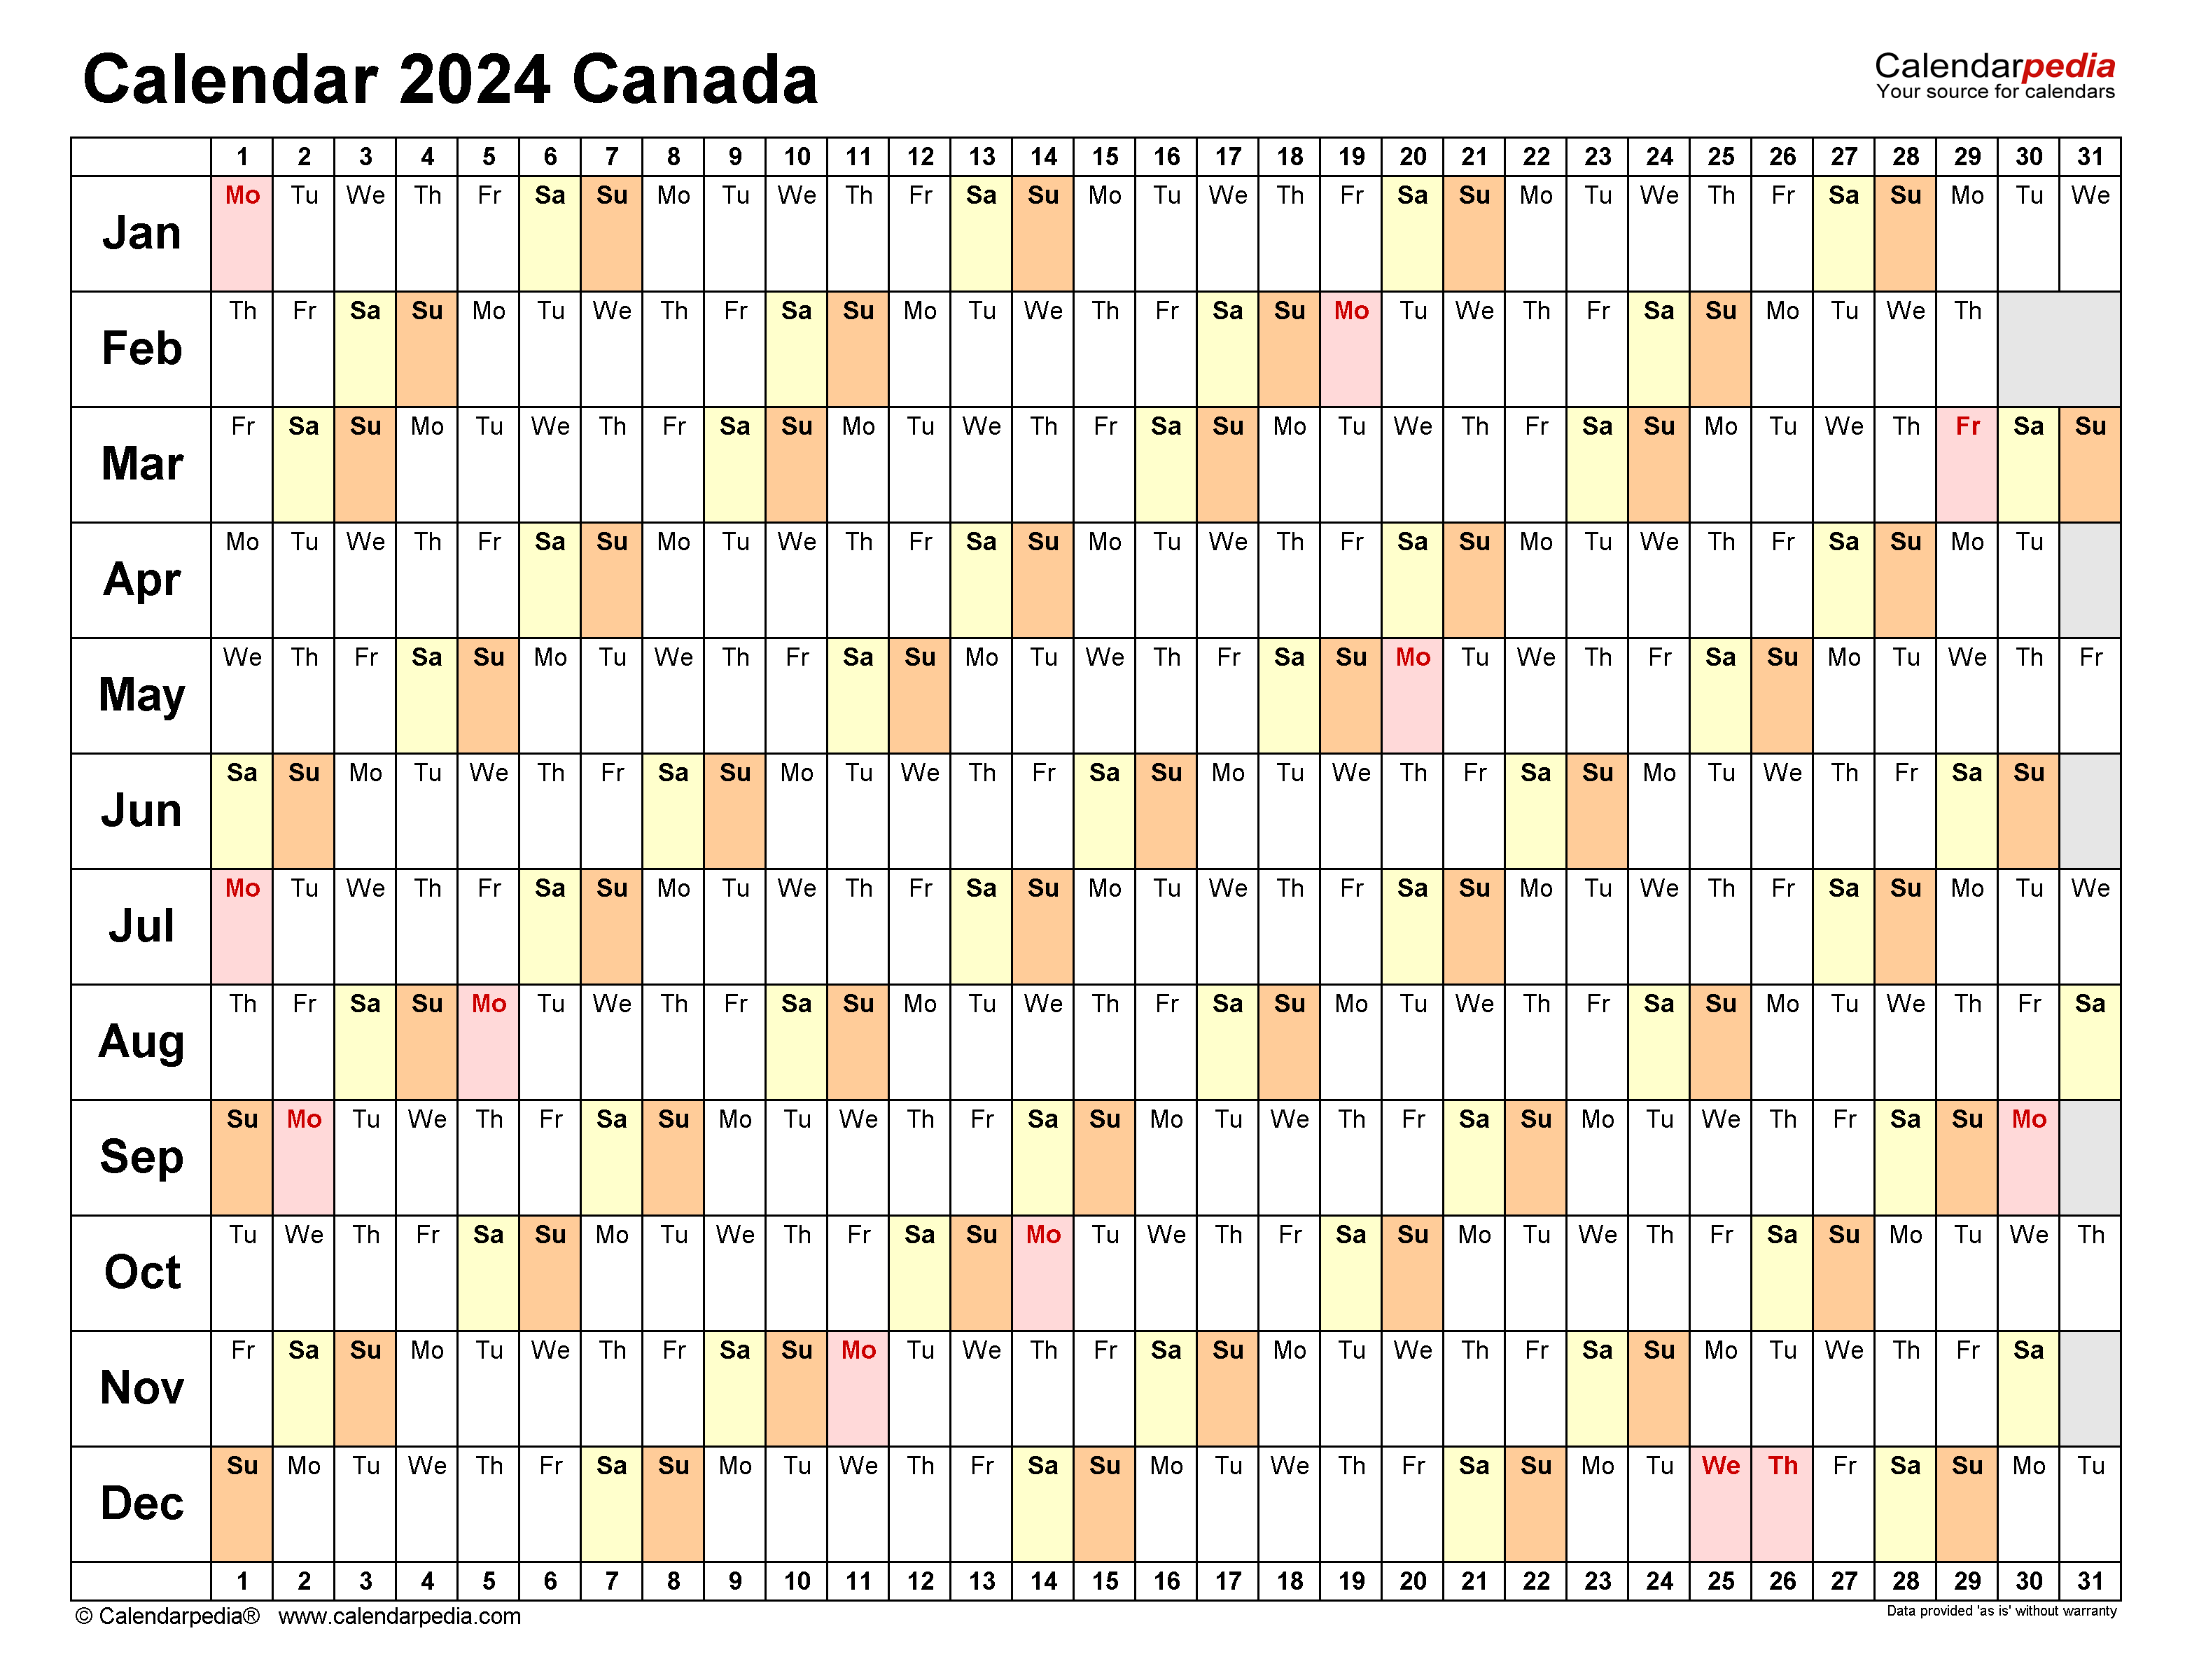 Calendar 2023 2024 Canada Time And Date Calendar 2023 Canada - Free Printable 2024 Yearly Calendar With Canadian Holidays